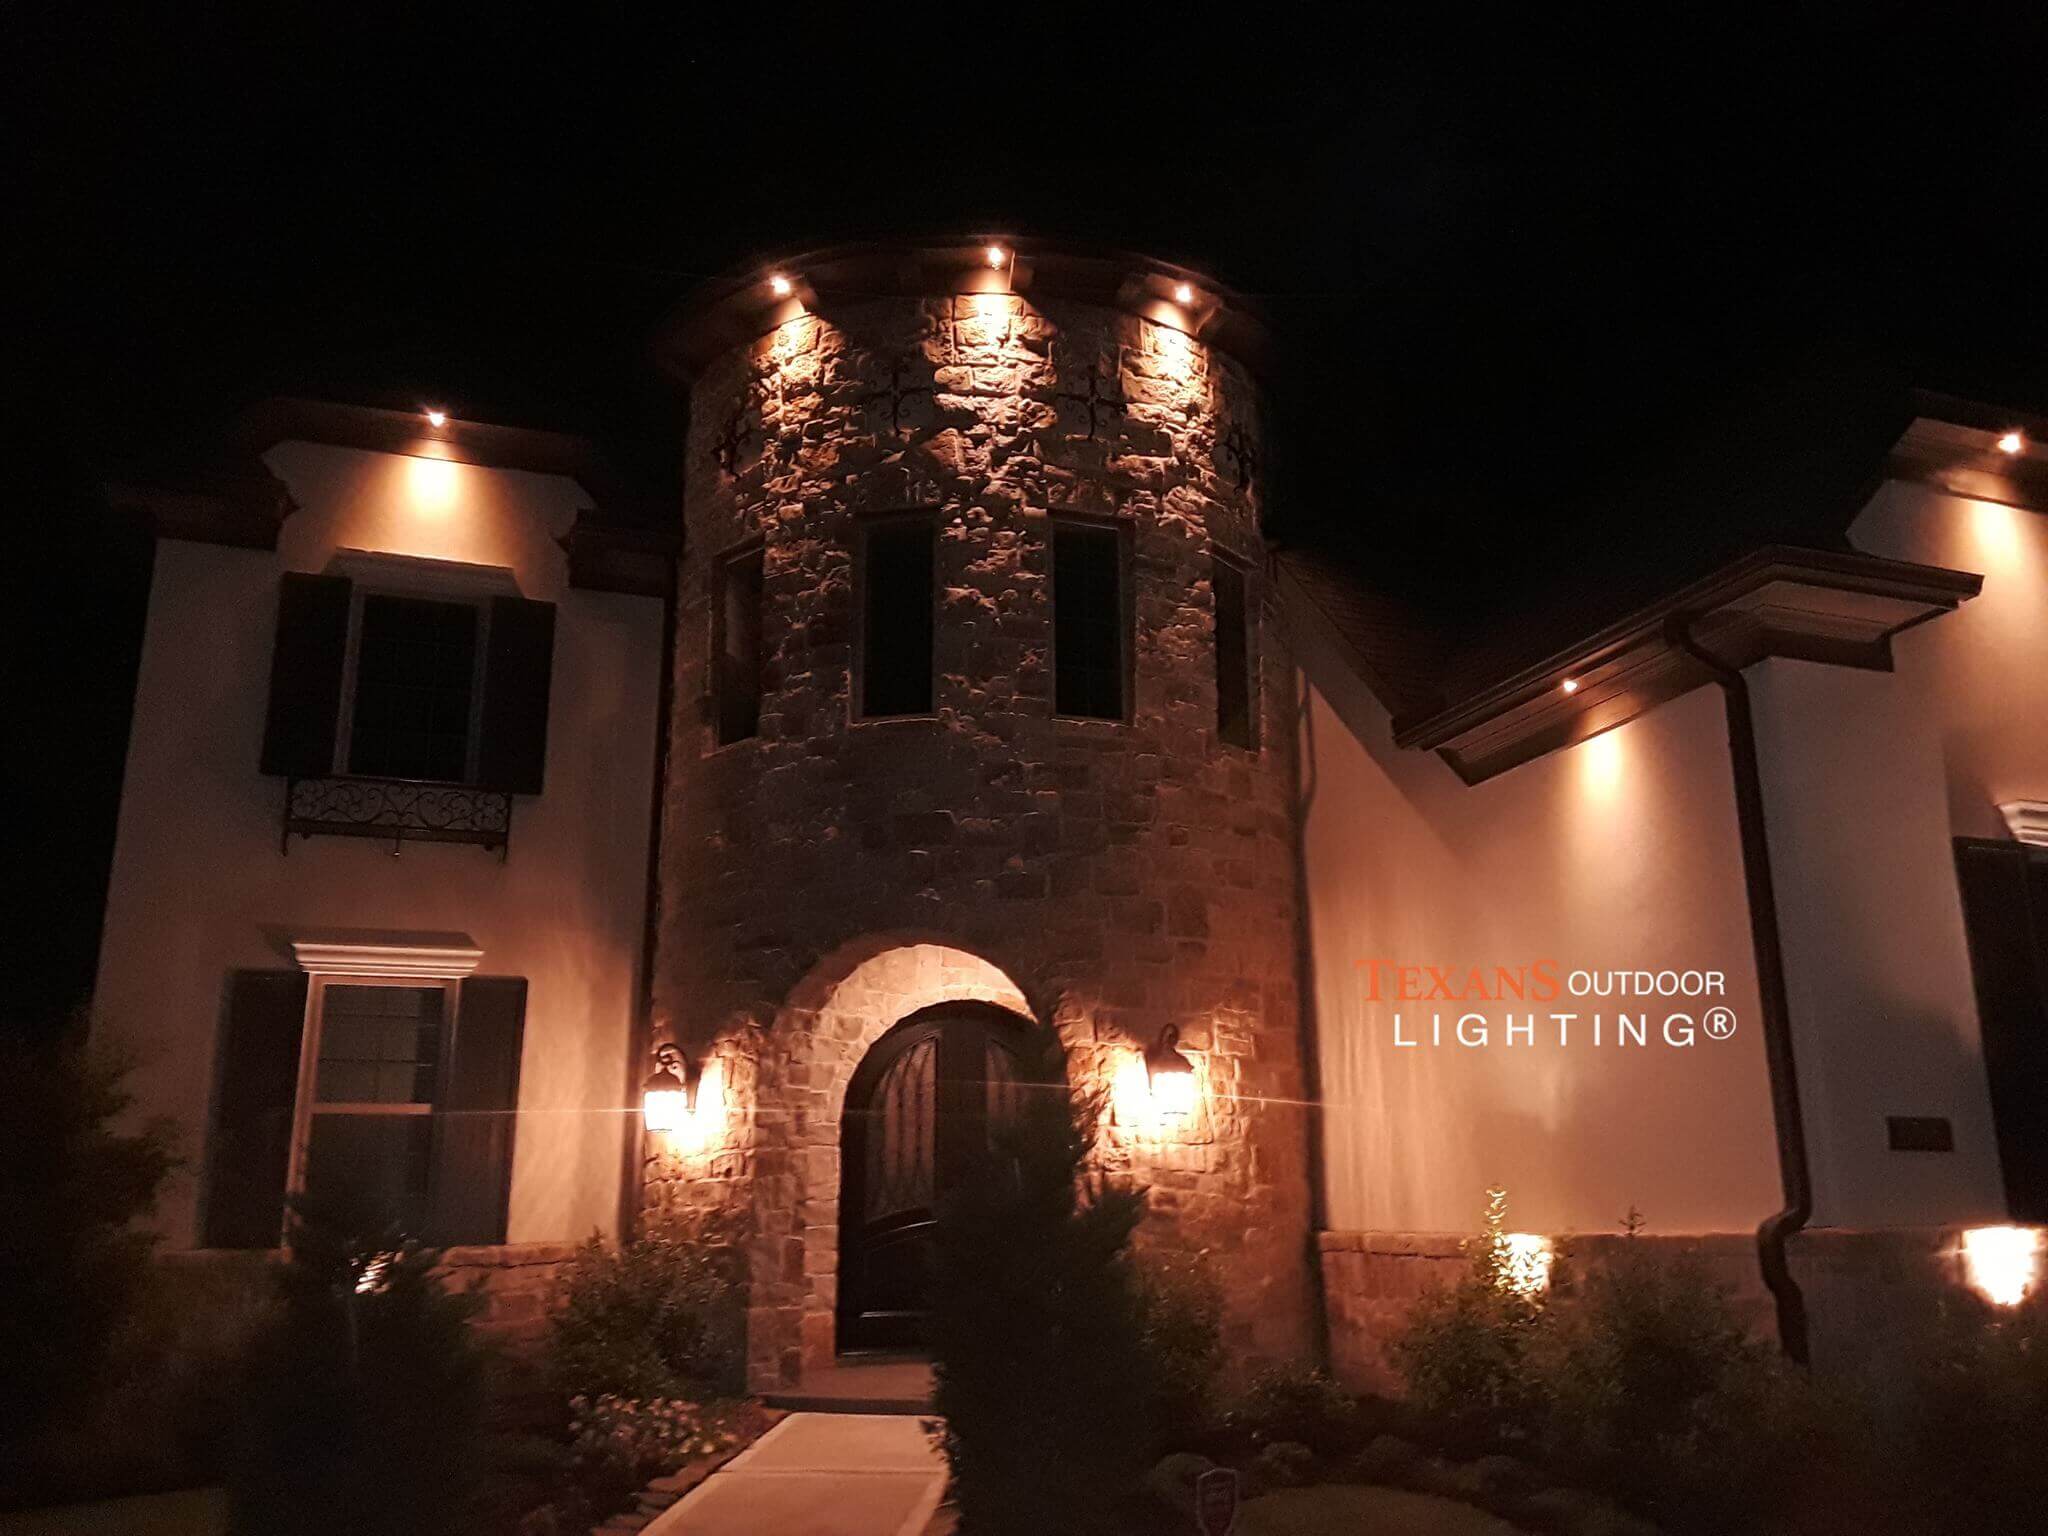 Transform your home with outdoor lighting